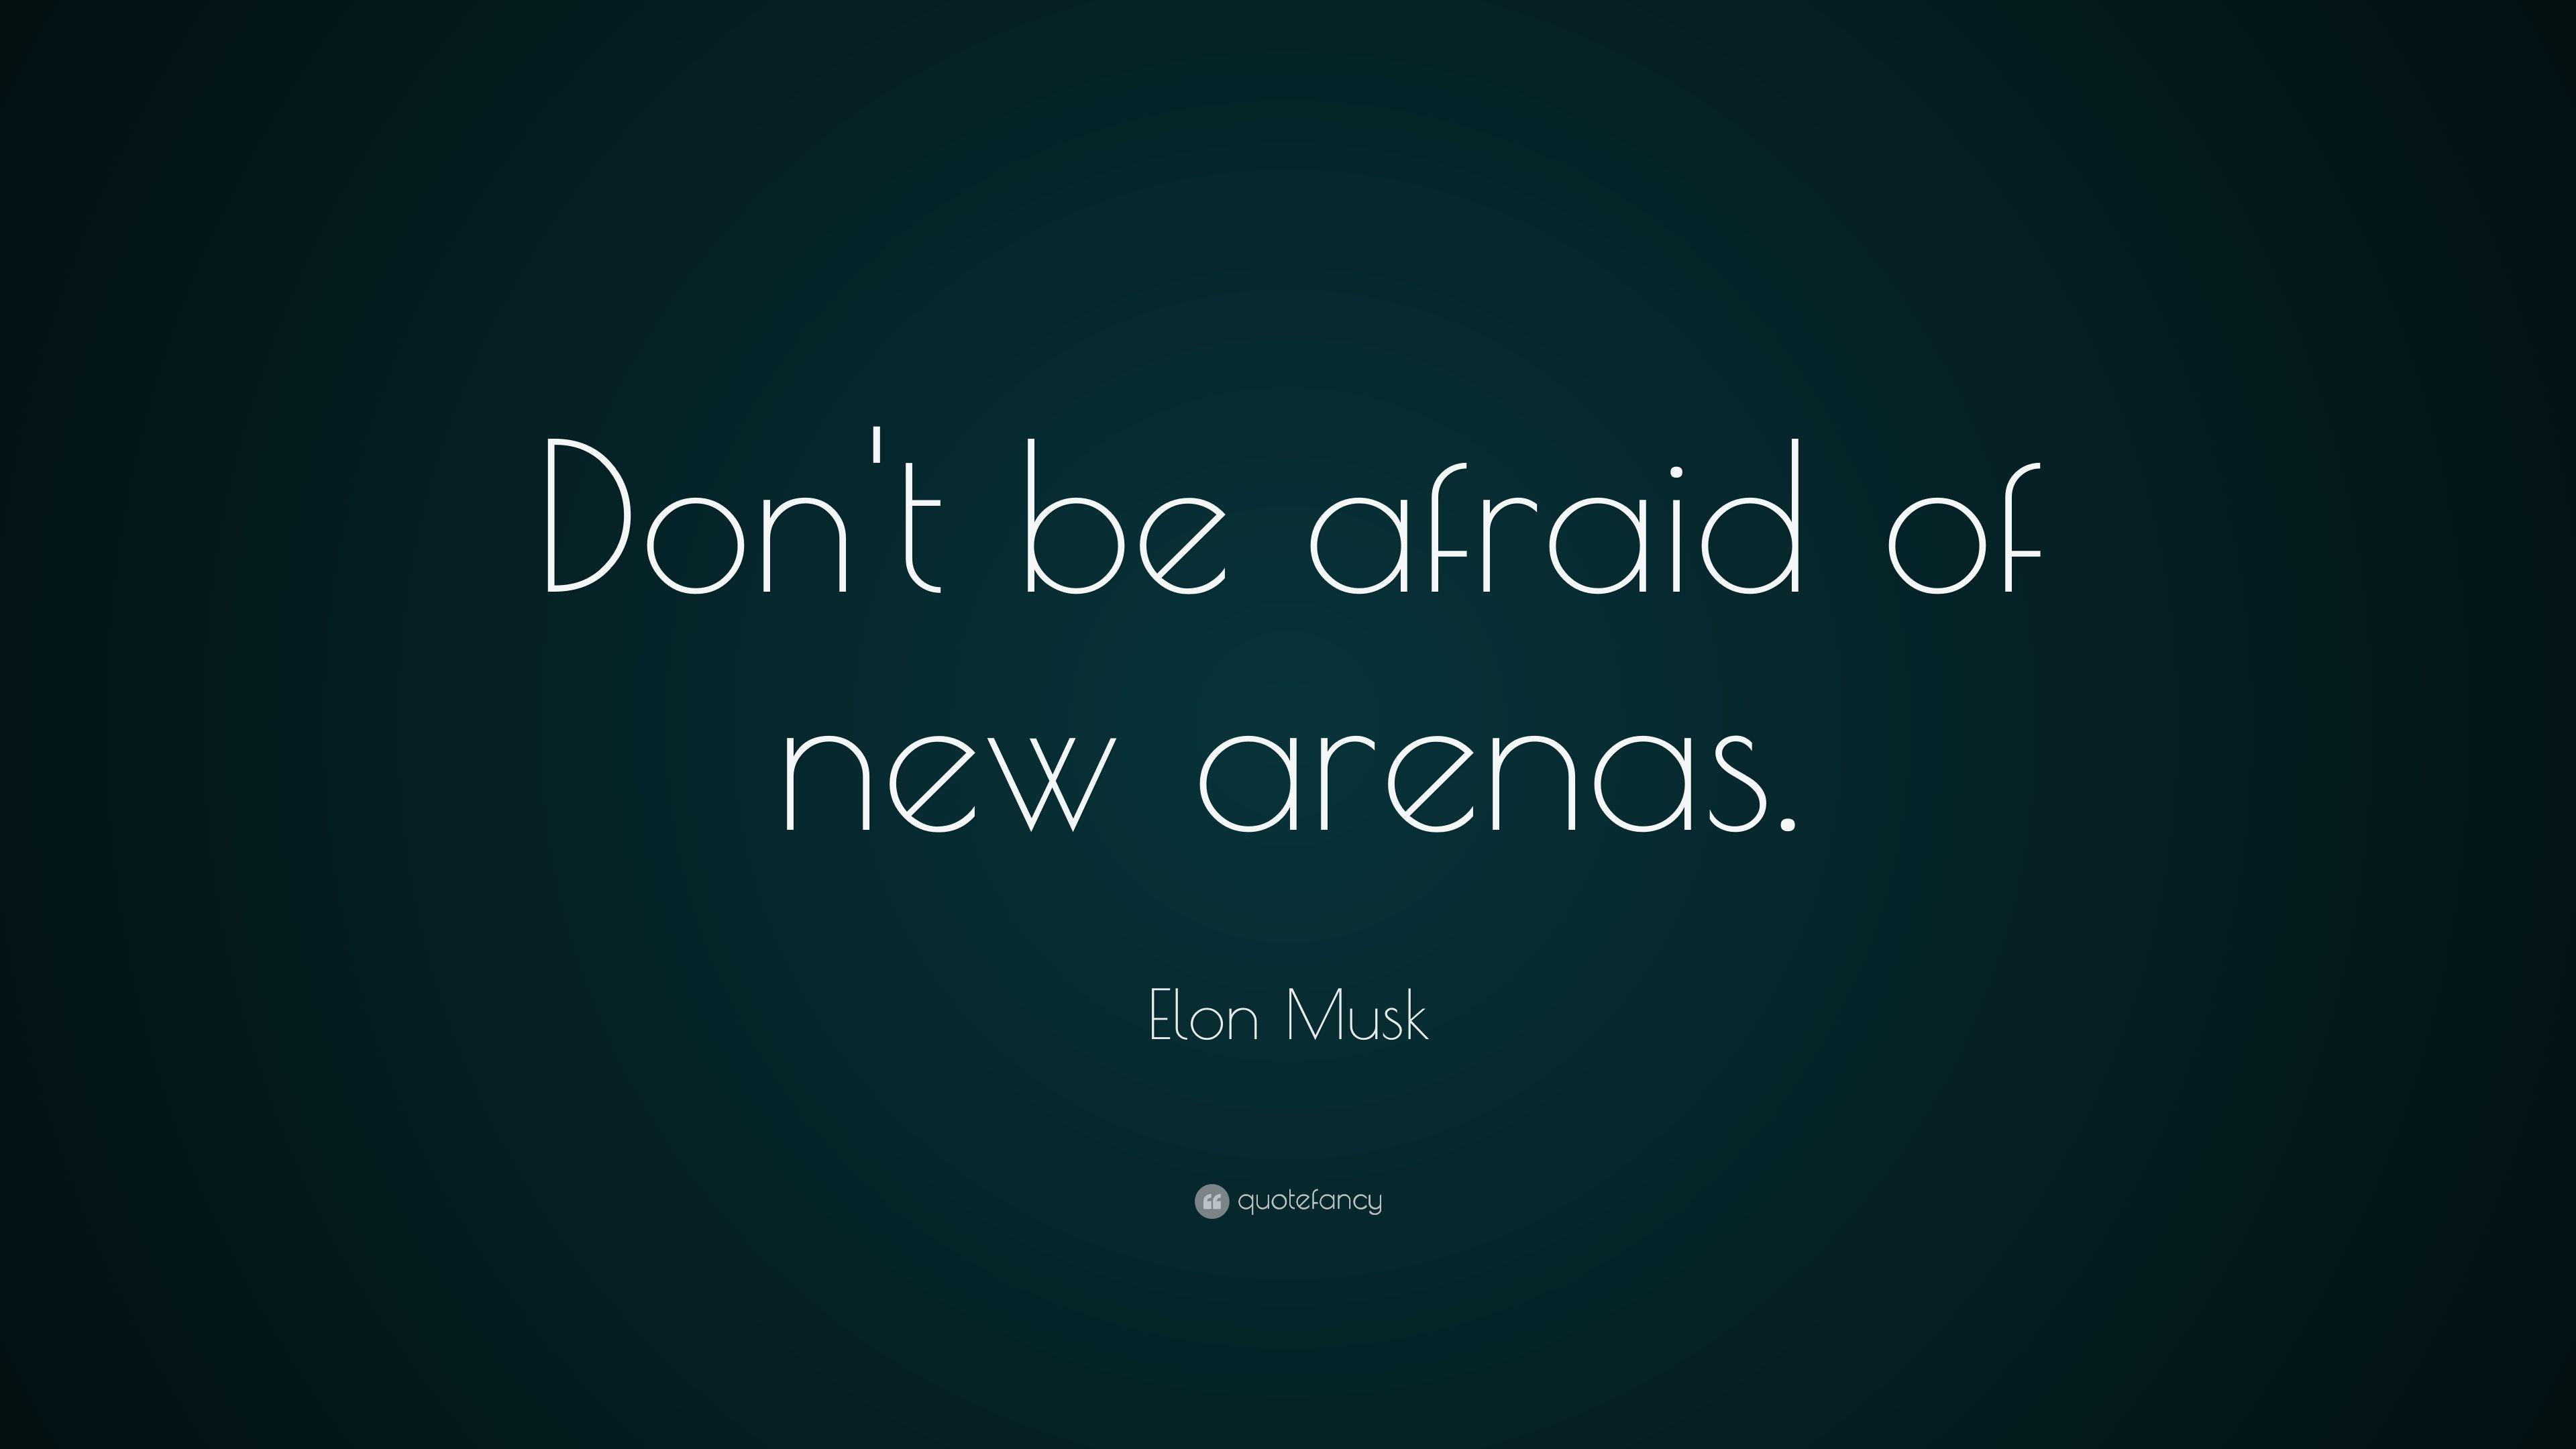 Elon Musk Quote: “Don't be afraid of new arenas.” 37 wallpaper